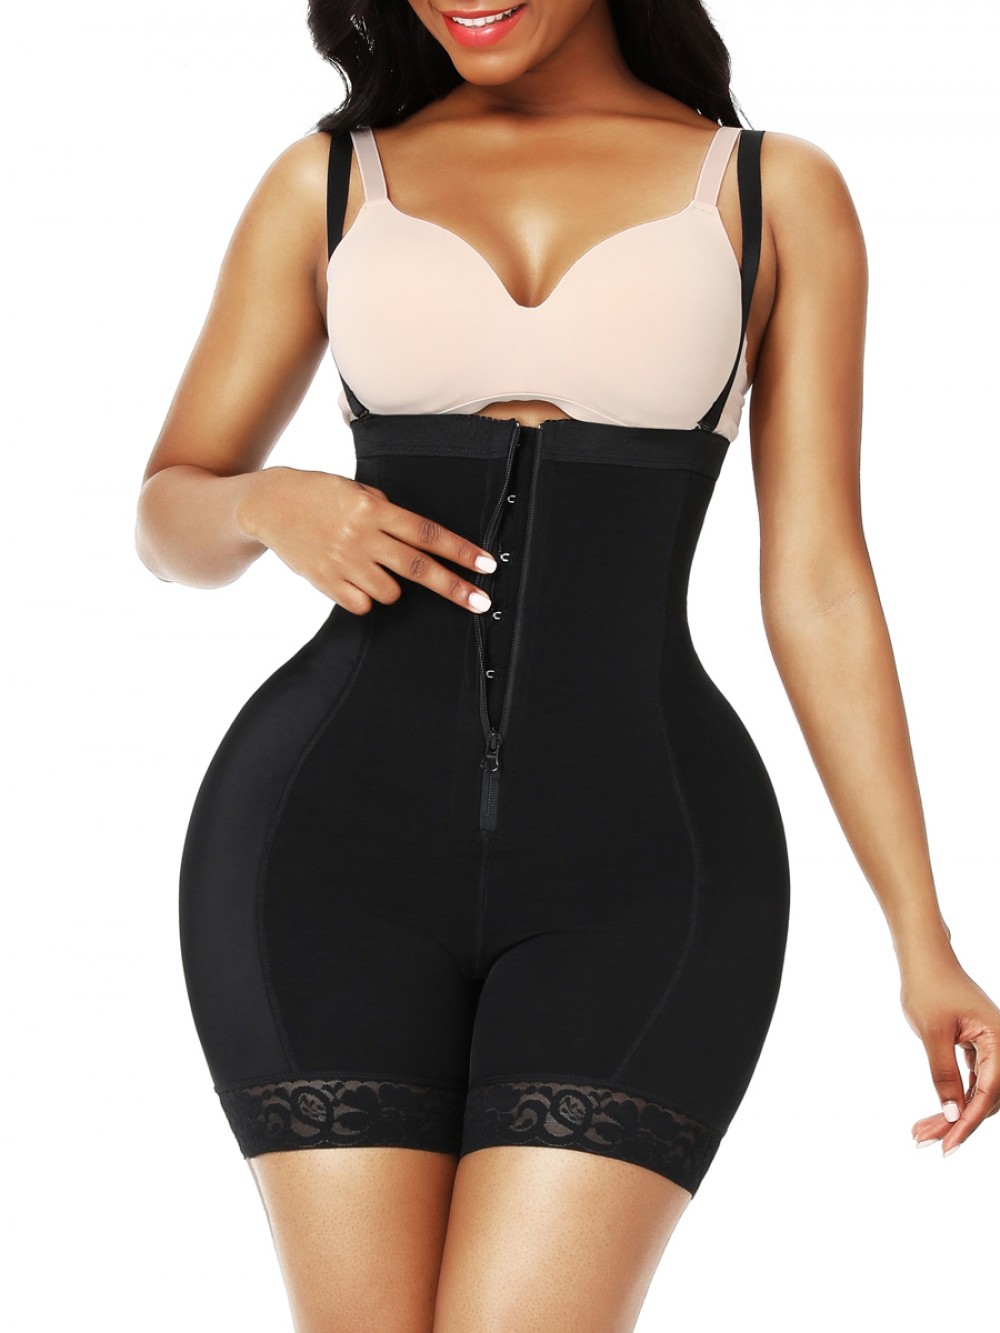 High Waist Butt Lifter Black Lace Removable Pads Slimming Tummy